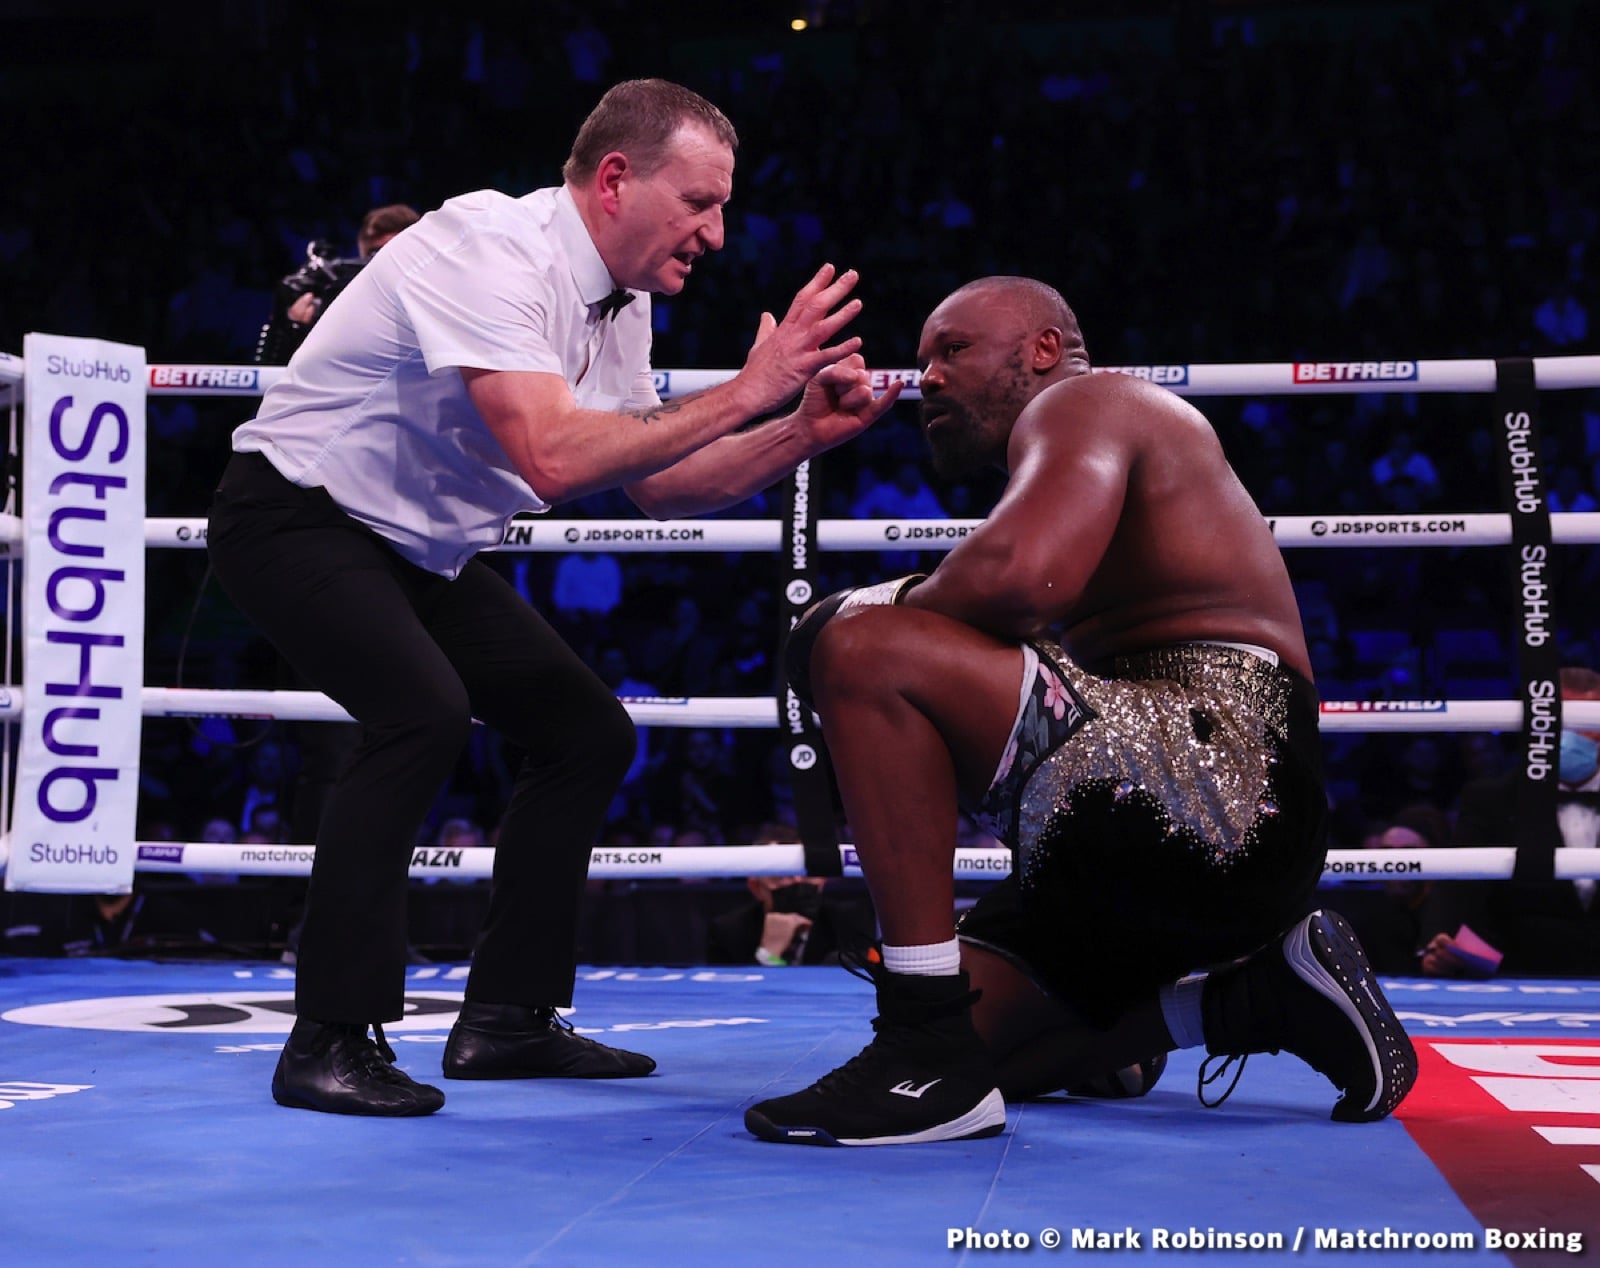 Image: Boxing Results: Joseph Parker Defeats Dereck Chisora in the UK!